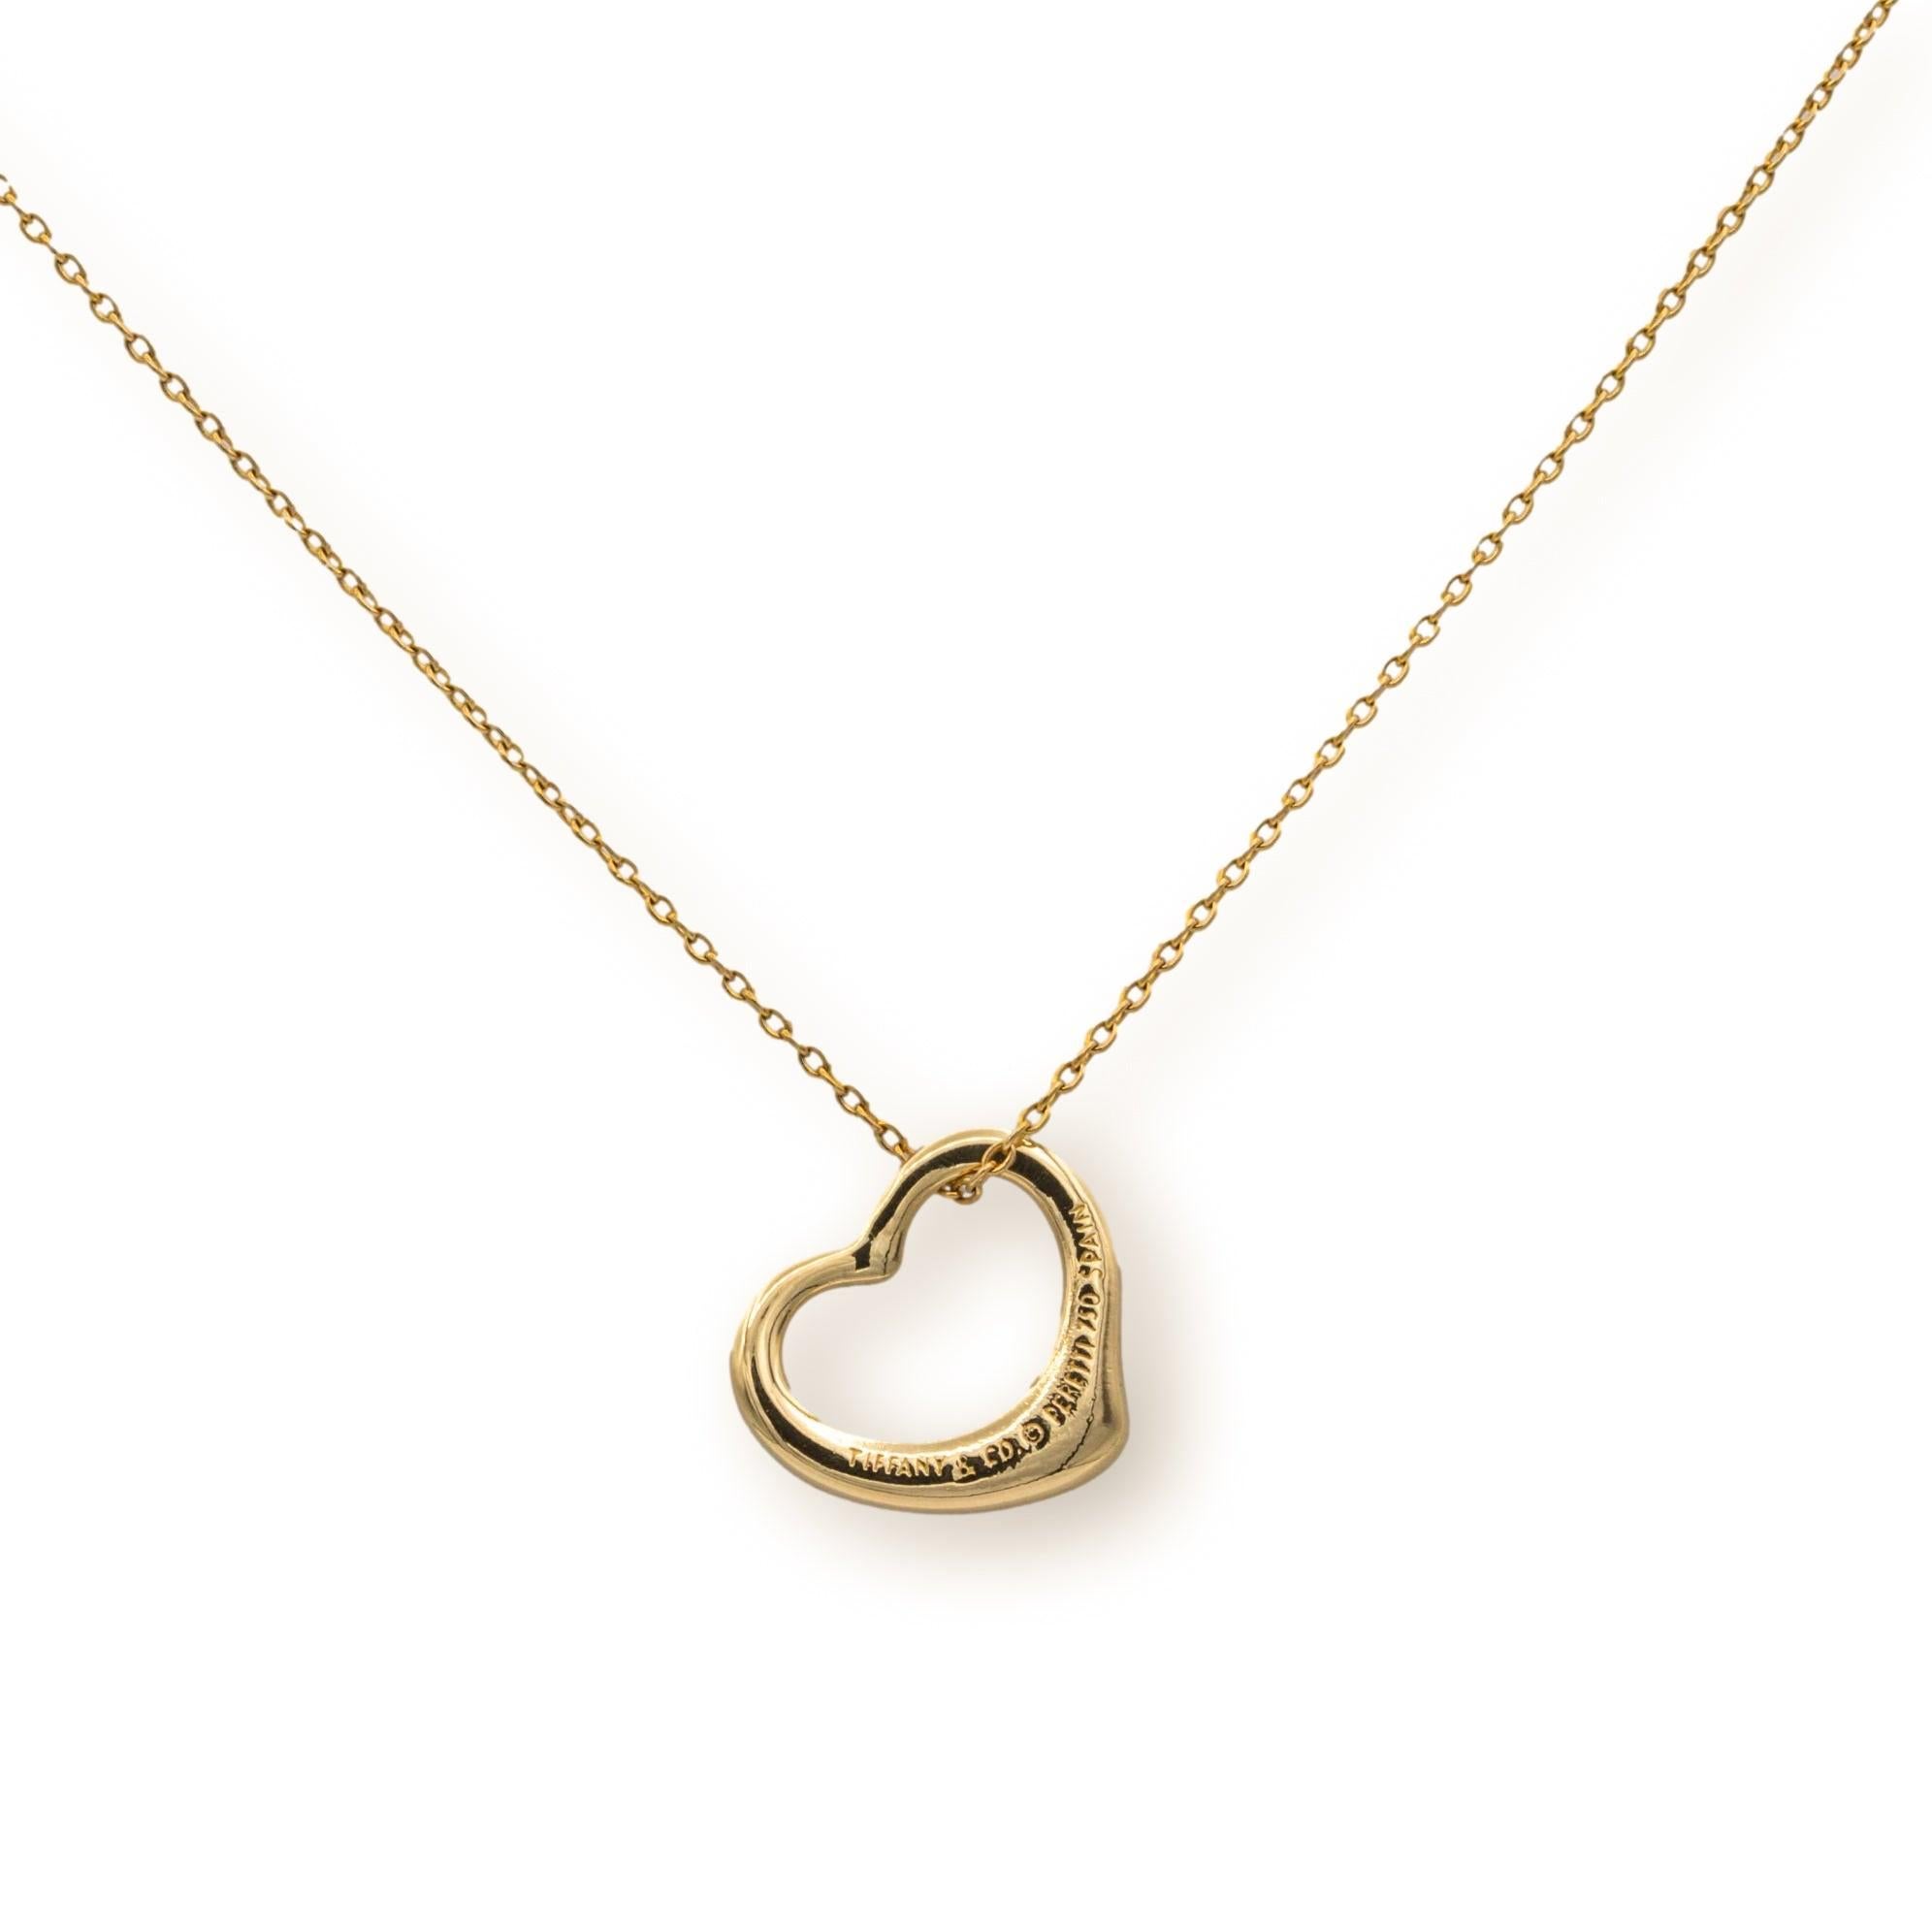 Elsa Peretti for Tiffany & Co. open heart pendant necklace finely crafted in 18 karat yellow gold with a 20” cable link chain with spring ring closure. The heart pendant measures 16mm.

NECKLACE  SPECIFICATIONS:
Hallmarks: Tiffany & Co. Peretti